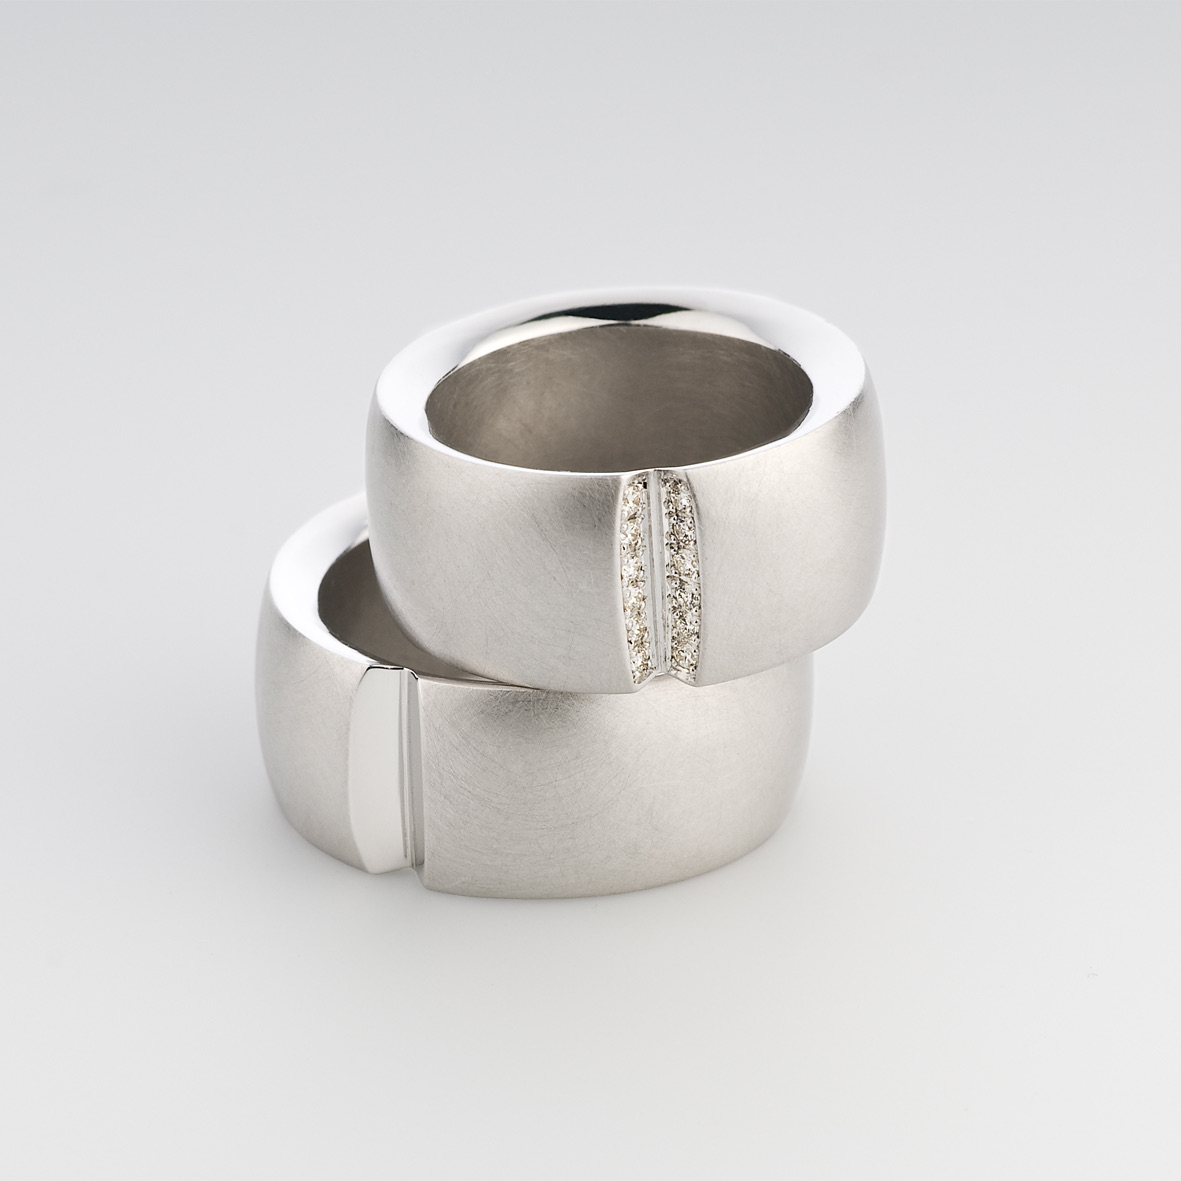 Vis-a-Vis wedding band | Atelier Marion Knorr Fine Jewelry, Ludwigsburg Germany